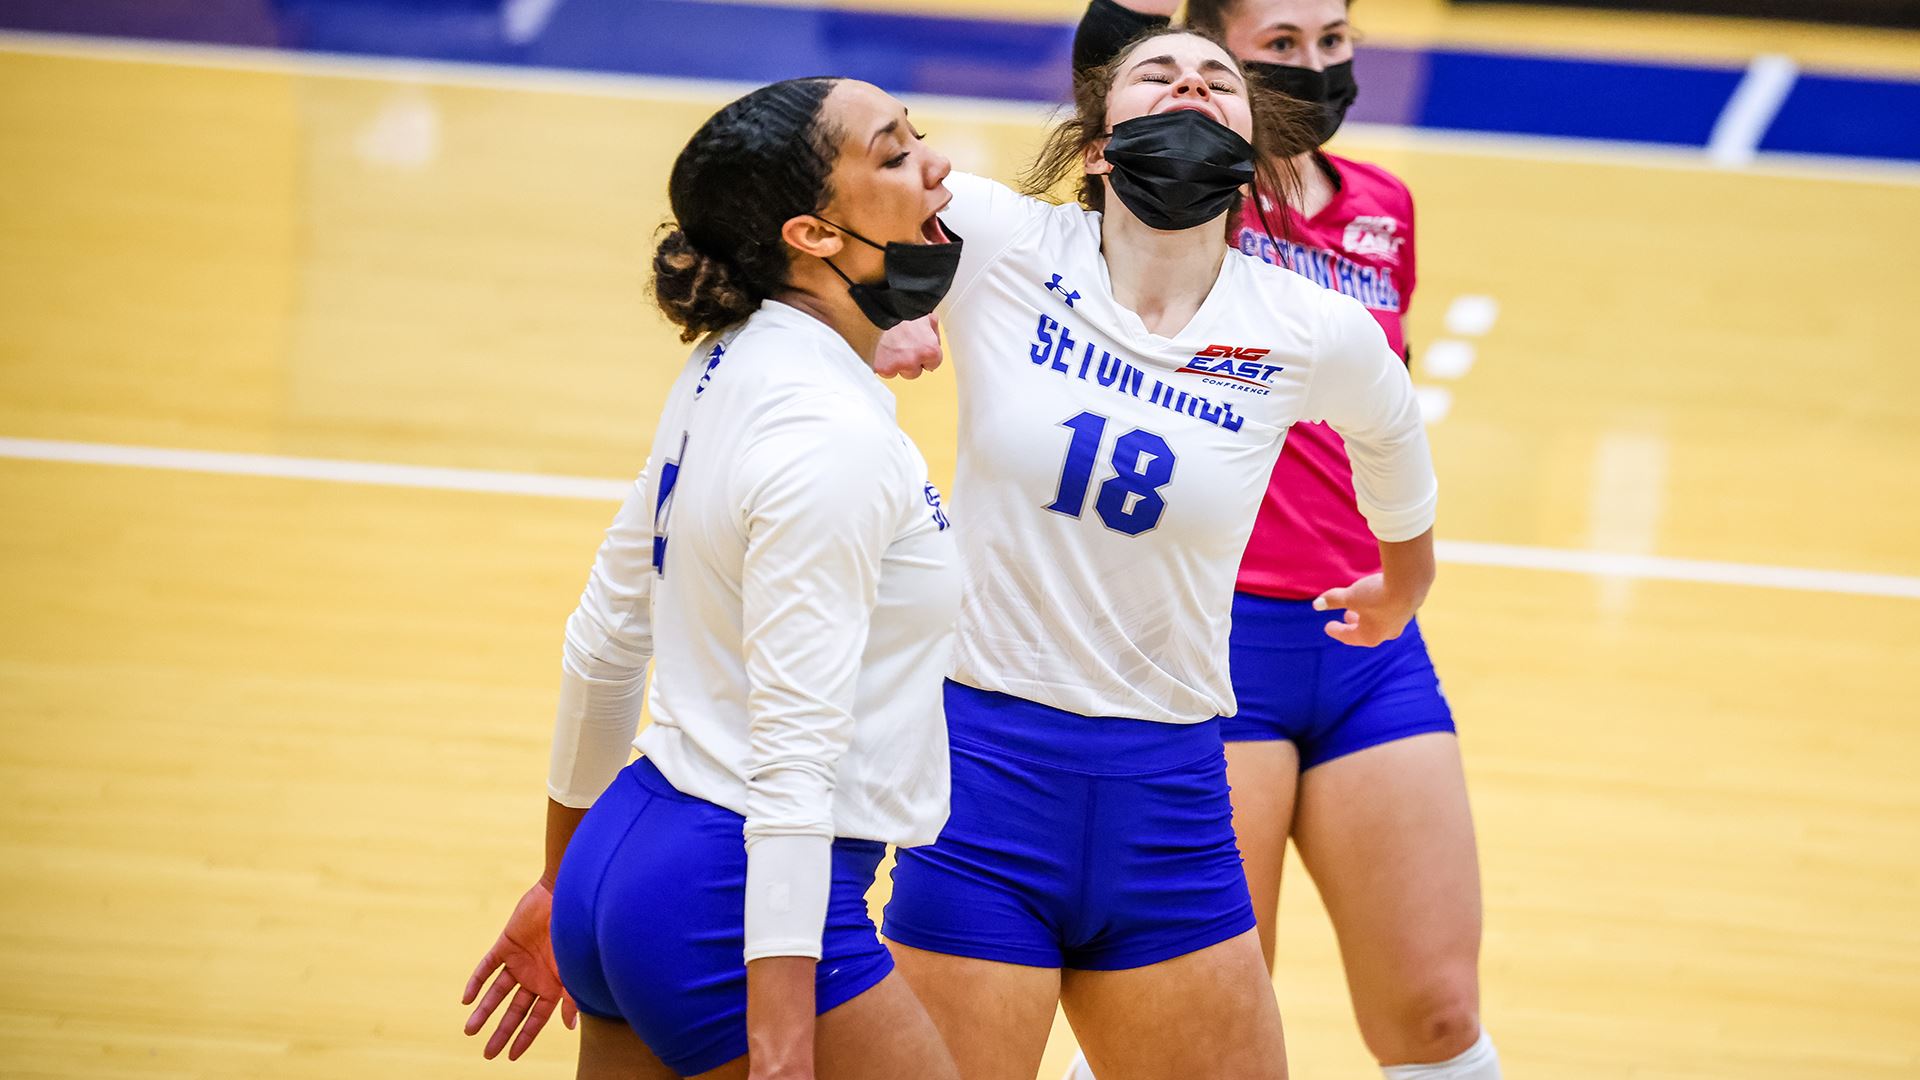 Seton Hall women's volleyball players celebrate after defeating Marist on the road.